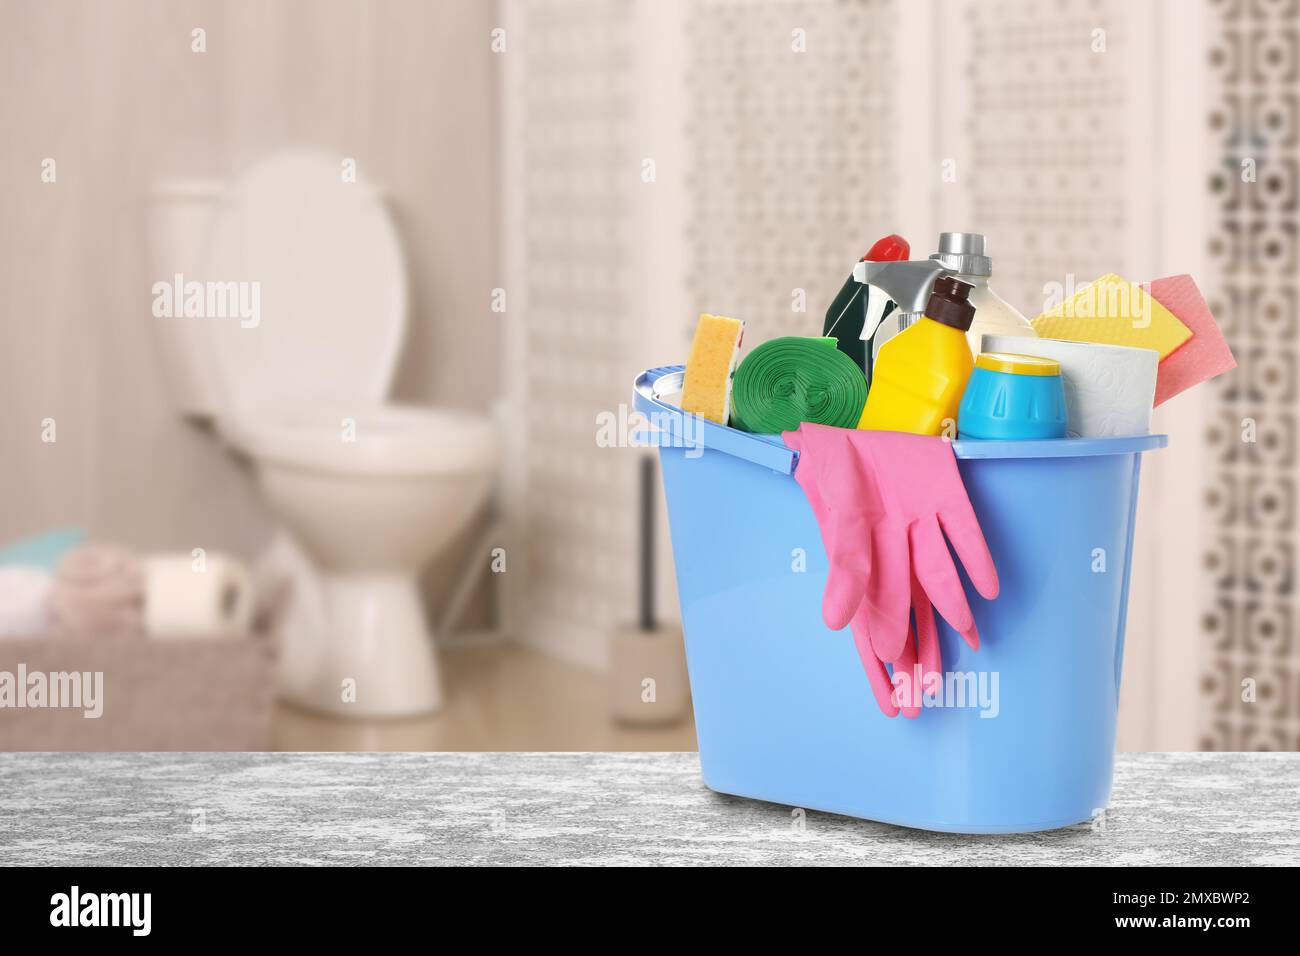 Cleaning Supplies Toilet Bowl Bathroom Space Text Stock Photo by